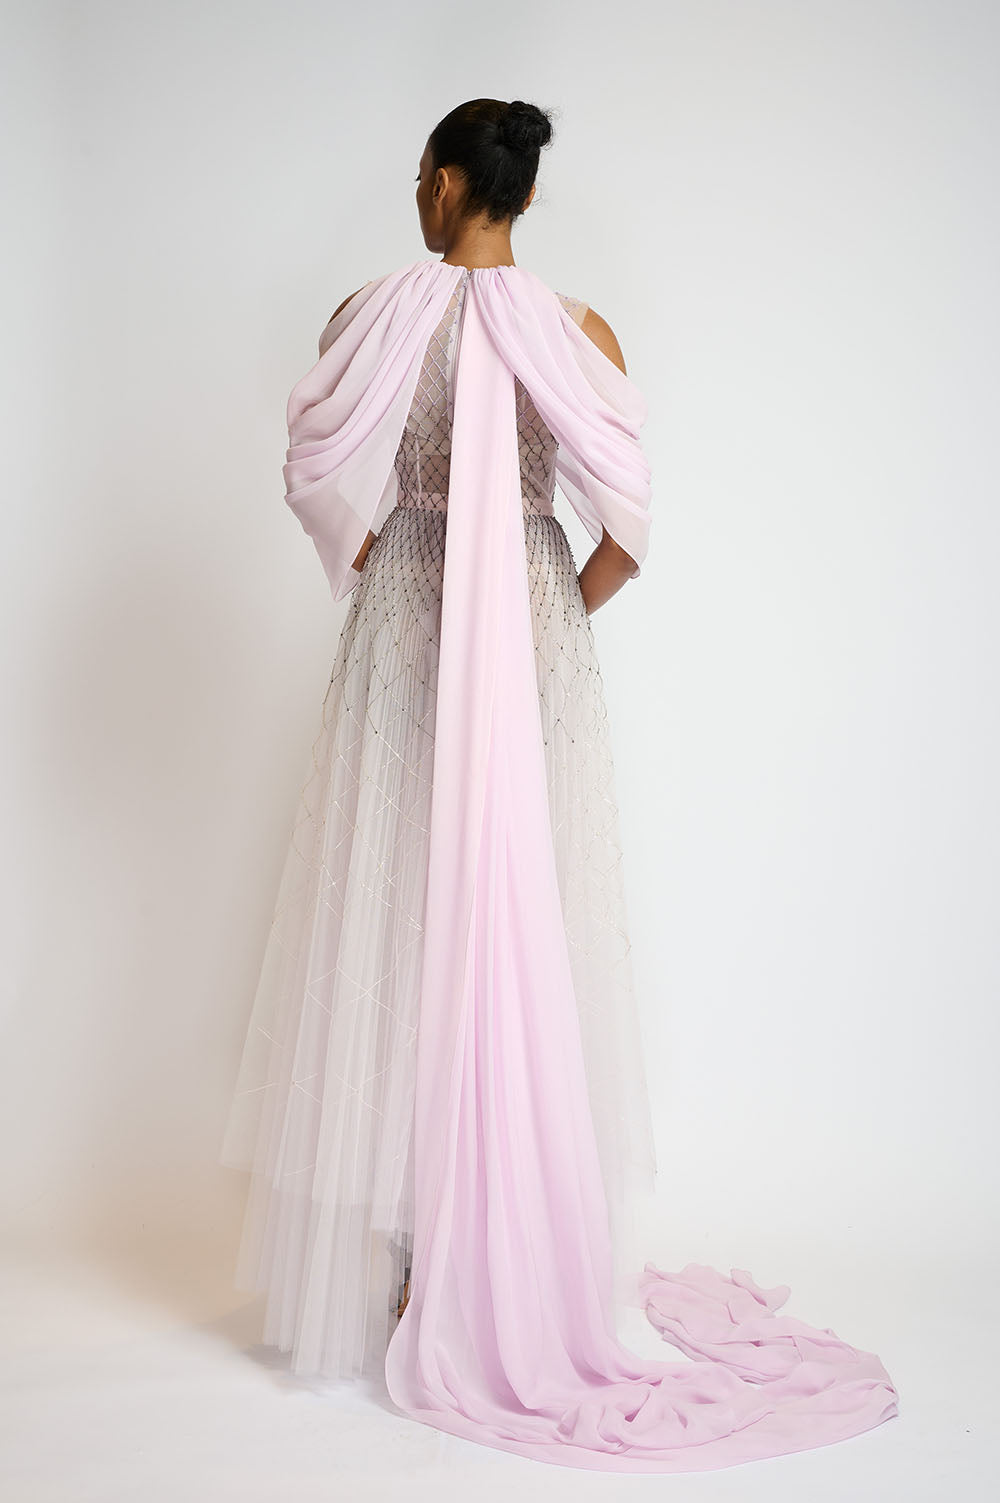 Crystal Lattice Embroidery Lilac Tulle Gown With Silk Chiffon Drape 3